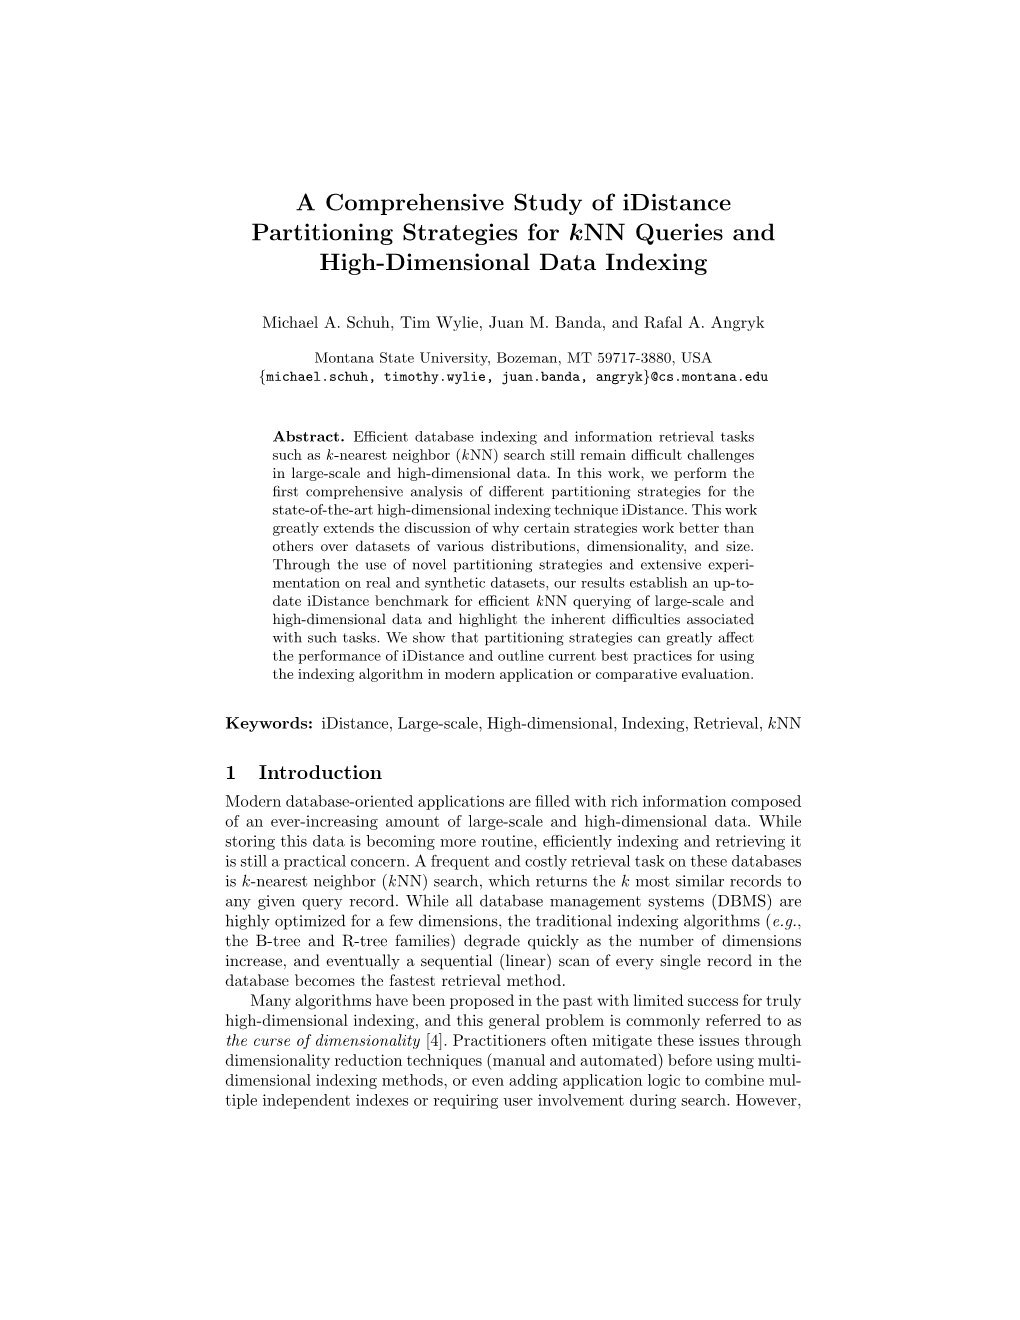 A Comprehensive Study of Idistance Partitioning Strategies for Knn Queries and High-Dimensional Data Indexing -. [ Tim Wylie